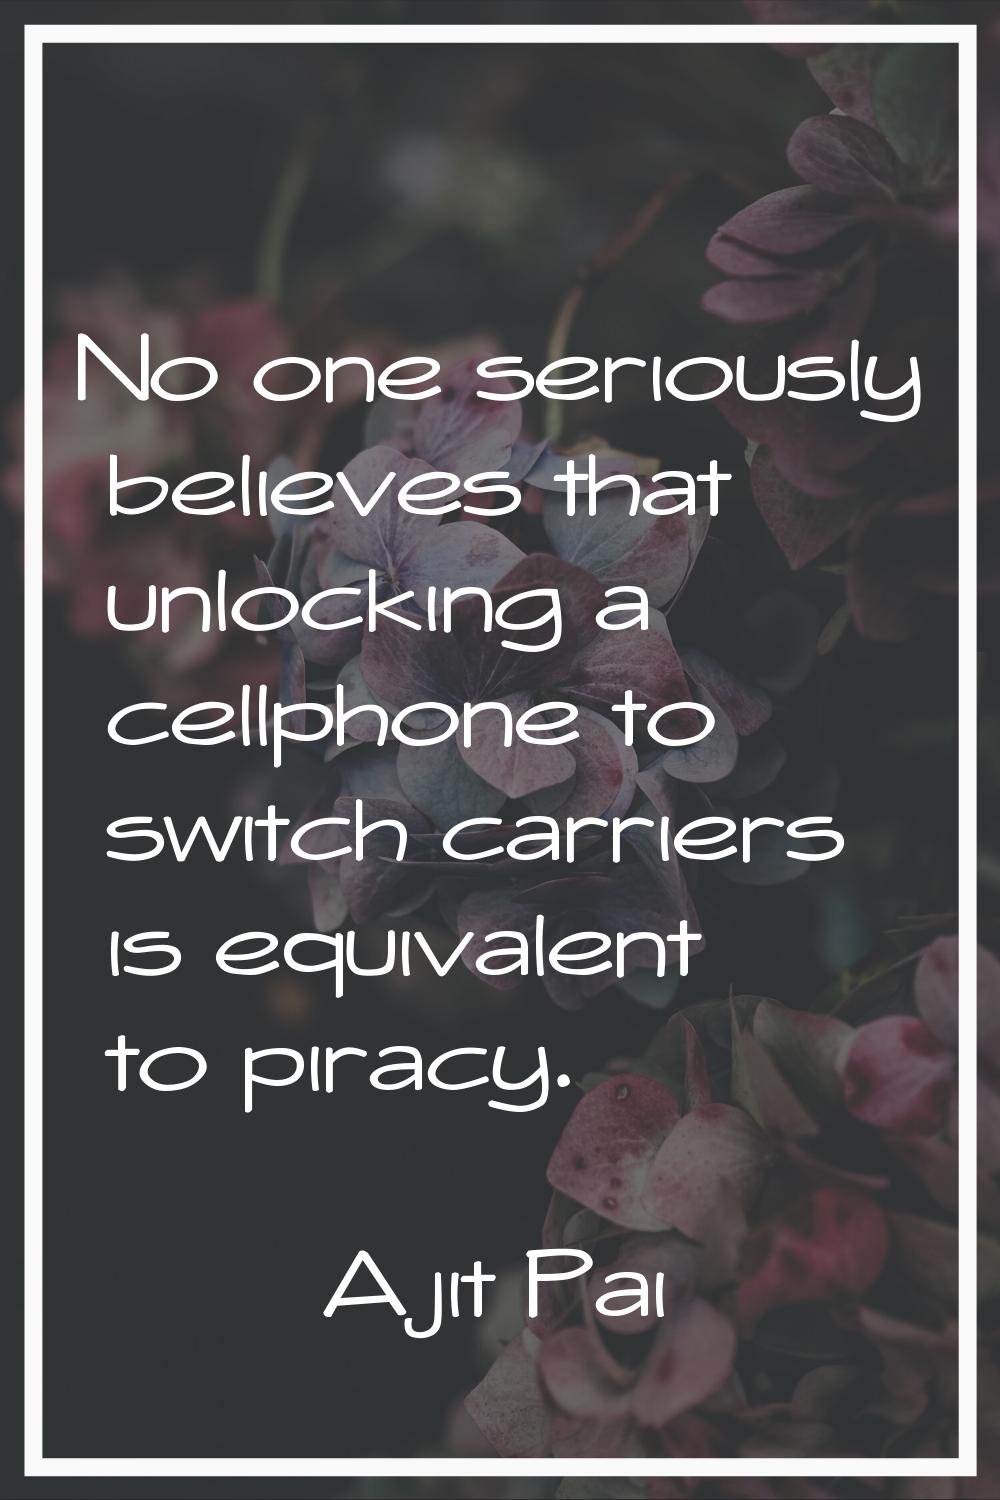 No one seriously believes that unlocking a cellphone to switch carriers is equivalent to piracy.